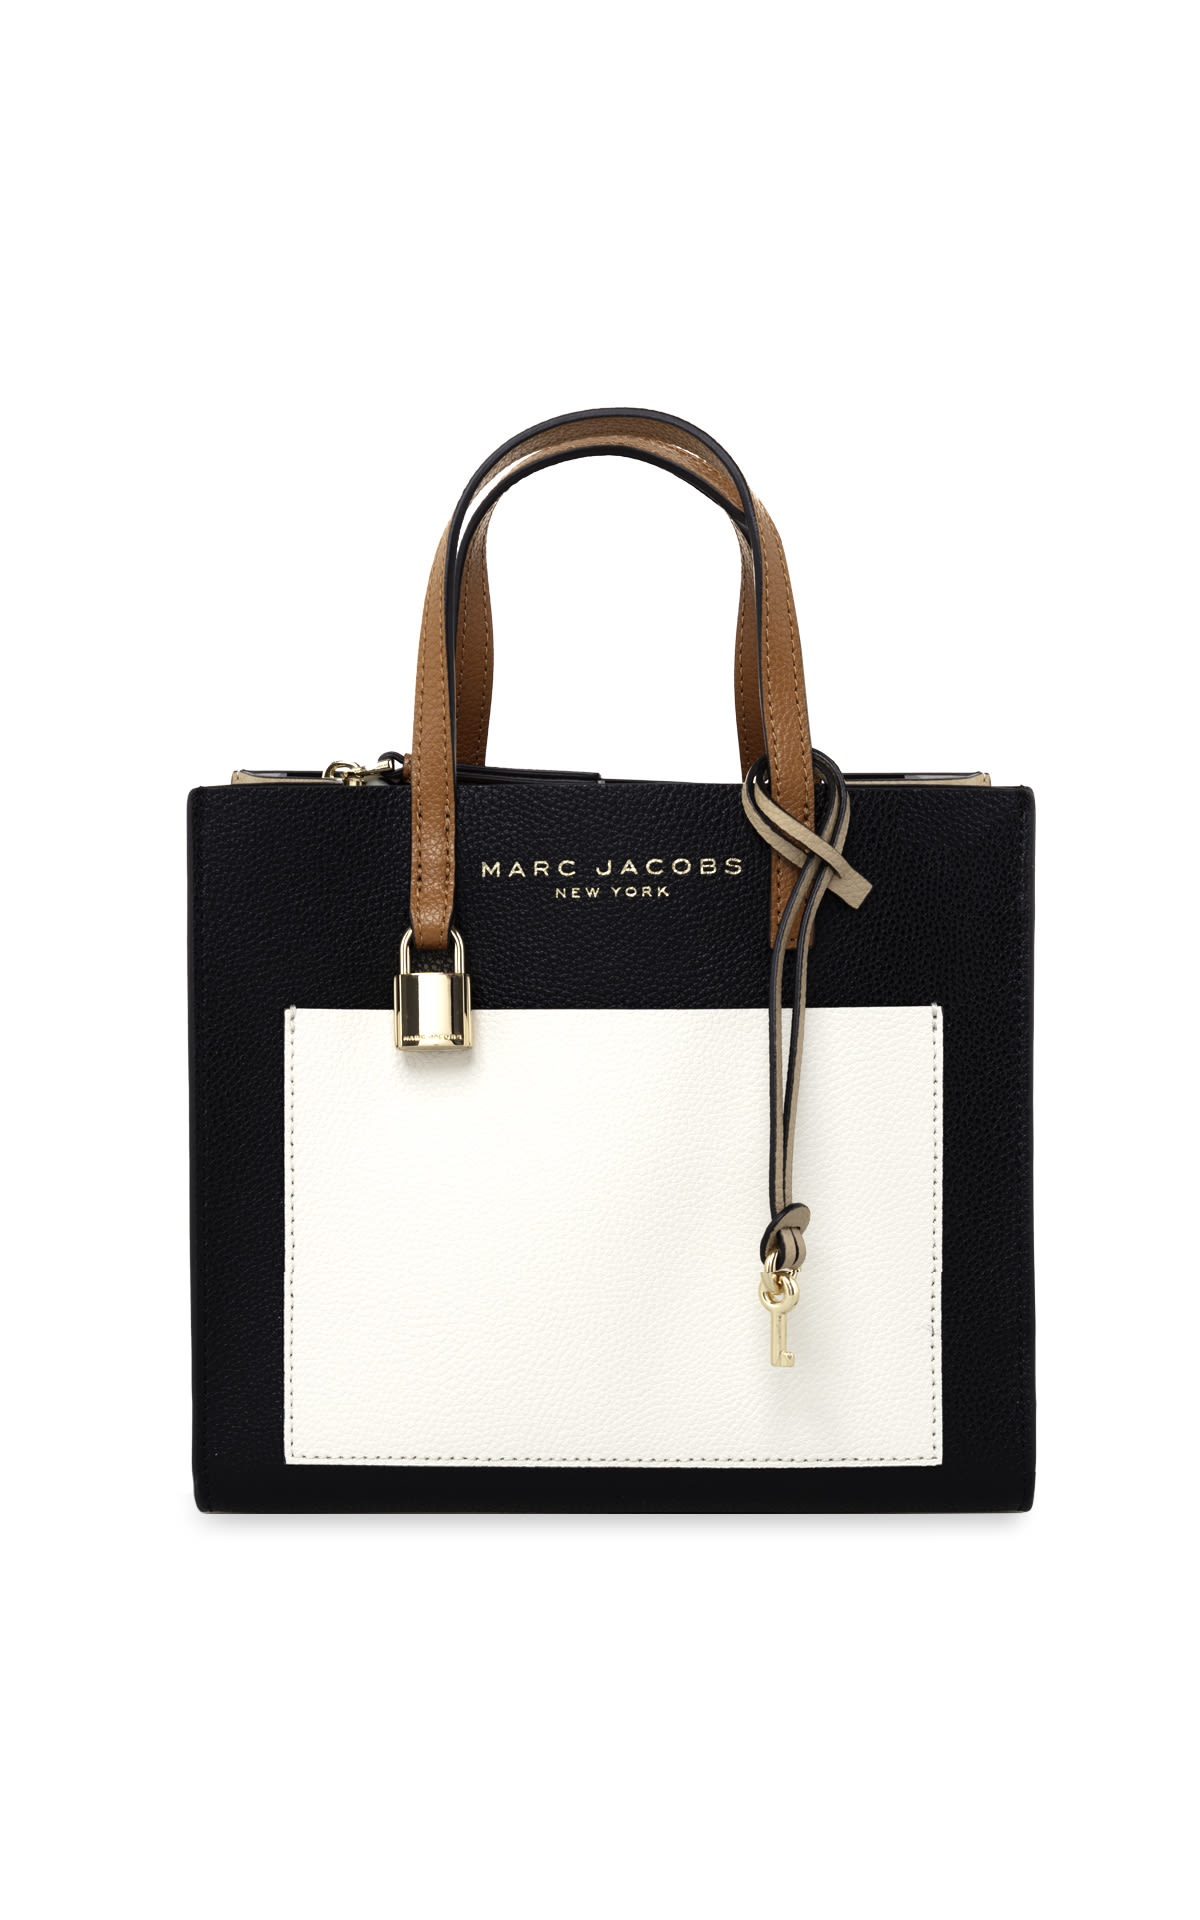 Black and cream leather bag